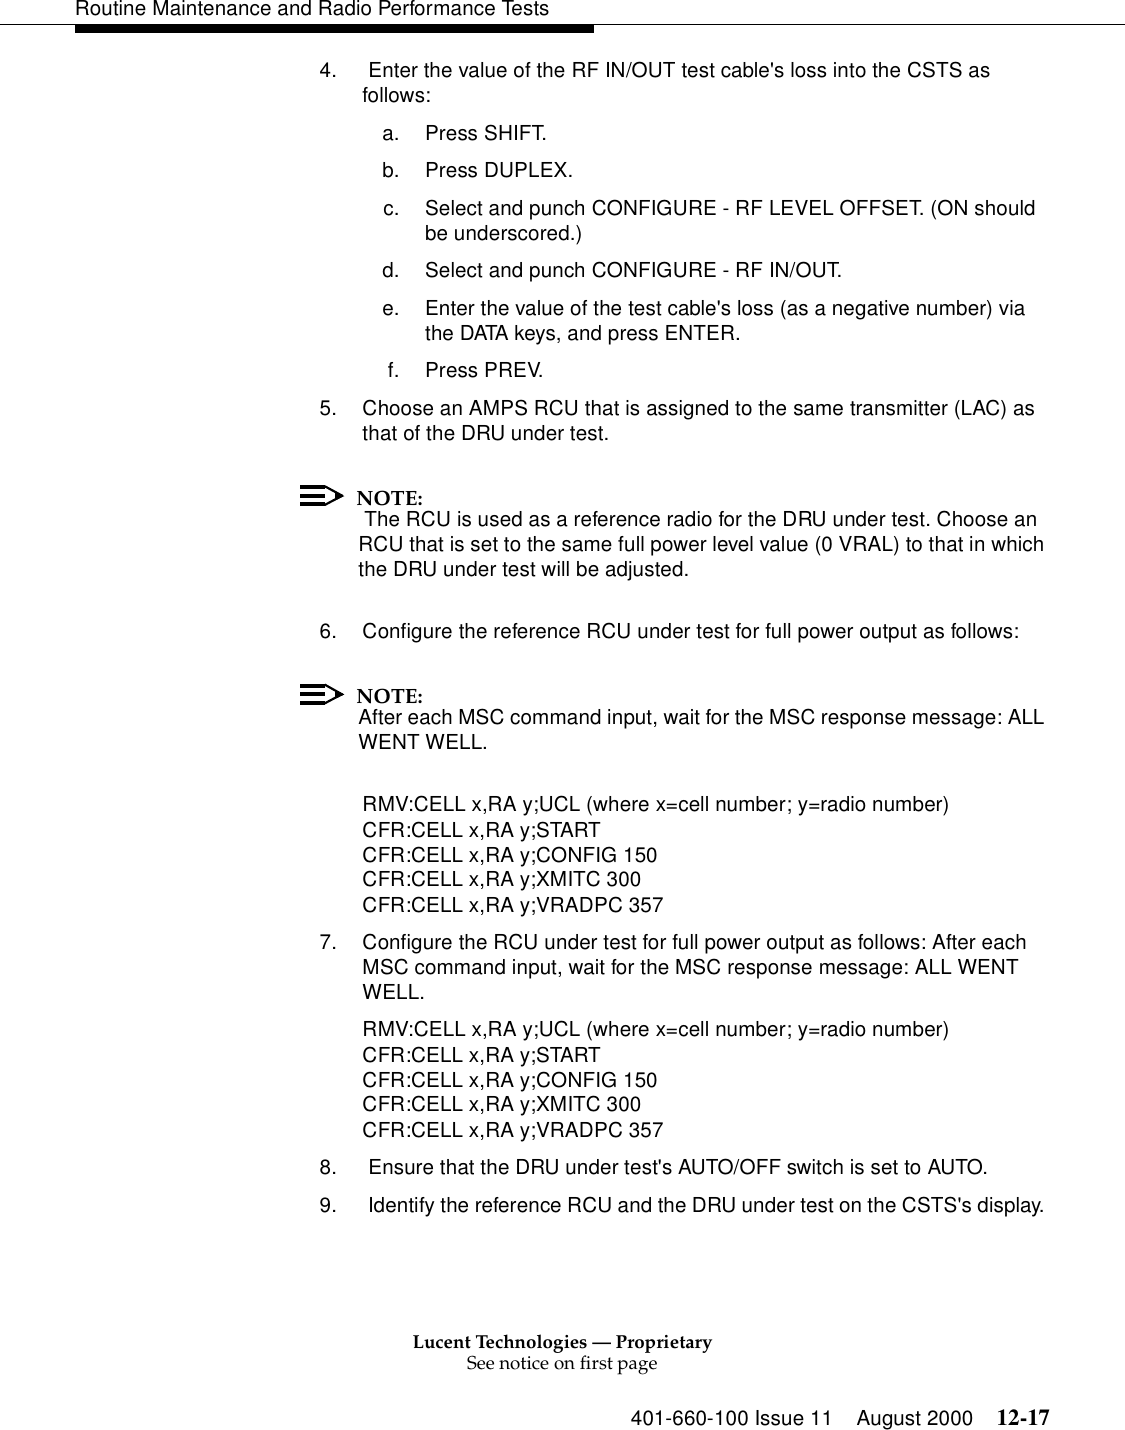 Lucent Technologies — ProprietarySee notice on first page401-660-100 Issue 11 August 2000 12-17Routine Maintenance and Radio Performance Tests4.  Enter the value of the RF IN/OUT test cable&apos;s loss into the CSTS as follows: a. Press SHIFT. b. Press DUPLEX. c. Select and punch CONFIGURE - RF LEVEL OFFSET. (ON should be underscored.) d. Select and punch CONFIGURE - RF IN/OUT. e. Enter the value of the test cable&apos;s loss (as a negative number) via the DATA keys, and press ENTER. f. Press PREV. 5. Choose an AMPS RCU that is assigned to the same transmitter (LAC) as that of the DRU under test.NOTE: The RCU is used as a reference radio for the DRU under test. Choose an RCU that is set to the same full power level value (0 VRAL) to that in which the DRU under test will be adjusted. 6. Configure the reference RCU under test for full power output as follows: NOTE:After each MSC command input, wait for the MSC response message: ALL WENT WELL. RMV:CELL x,RA y;UCL (where x=cell number; y=radio number)CFR:CELL x,RA y;START CFR:CELL x,RA y;CONFIG 150 CFR:CELL x,RA y;XMITC 300 CFR:CELL x,RA y;VRADPC 3577. Configure the RCU under test for full power output as follows: After each MSC command input, wait for the MSC response message: ALL WENT WELL. RMV:CELL x,RA y;UCL (where x=cell number; y=radio number)CFR:CELL x,RA y;START CFR:CELL x,RA y;CONFIG 150 CFR:CELL x,RA y;XMITC 300 CFR:CELL x,RA y;VRADPC 3578.  Ensure that the DRU under test&apos;s AUTO/OFF switch is set to AUTO. 9.  Identify the reference RCU and the DRU under test on the CSTS&apos;s display. 